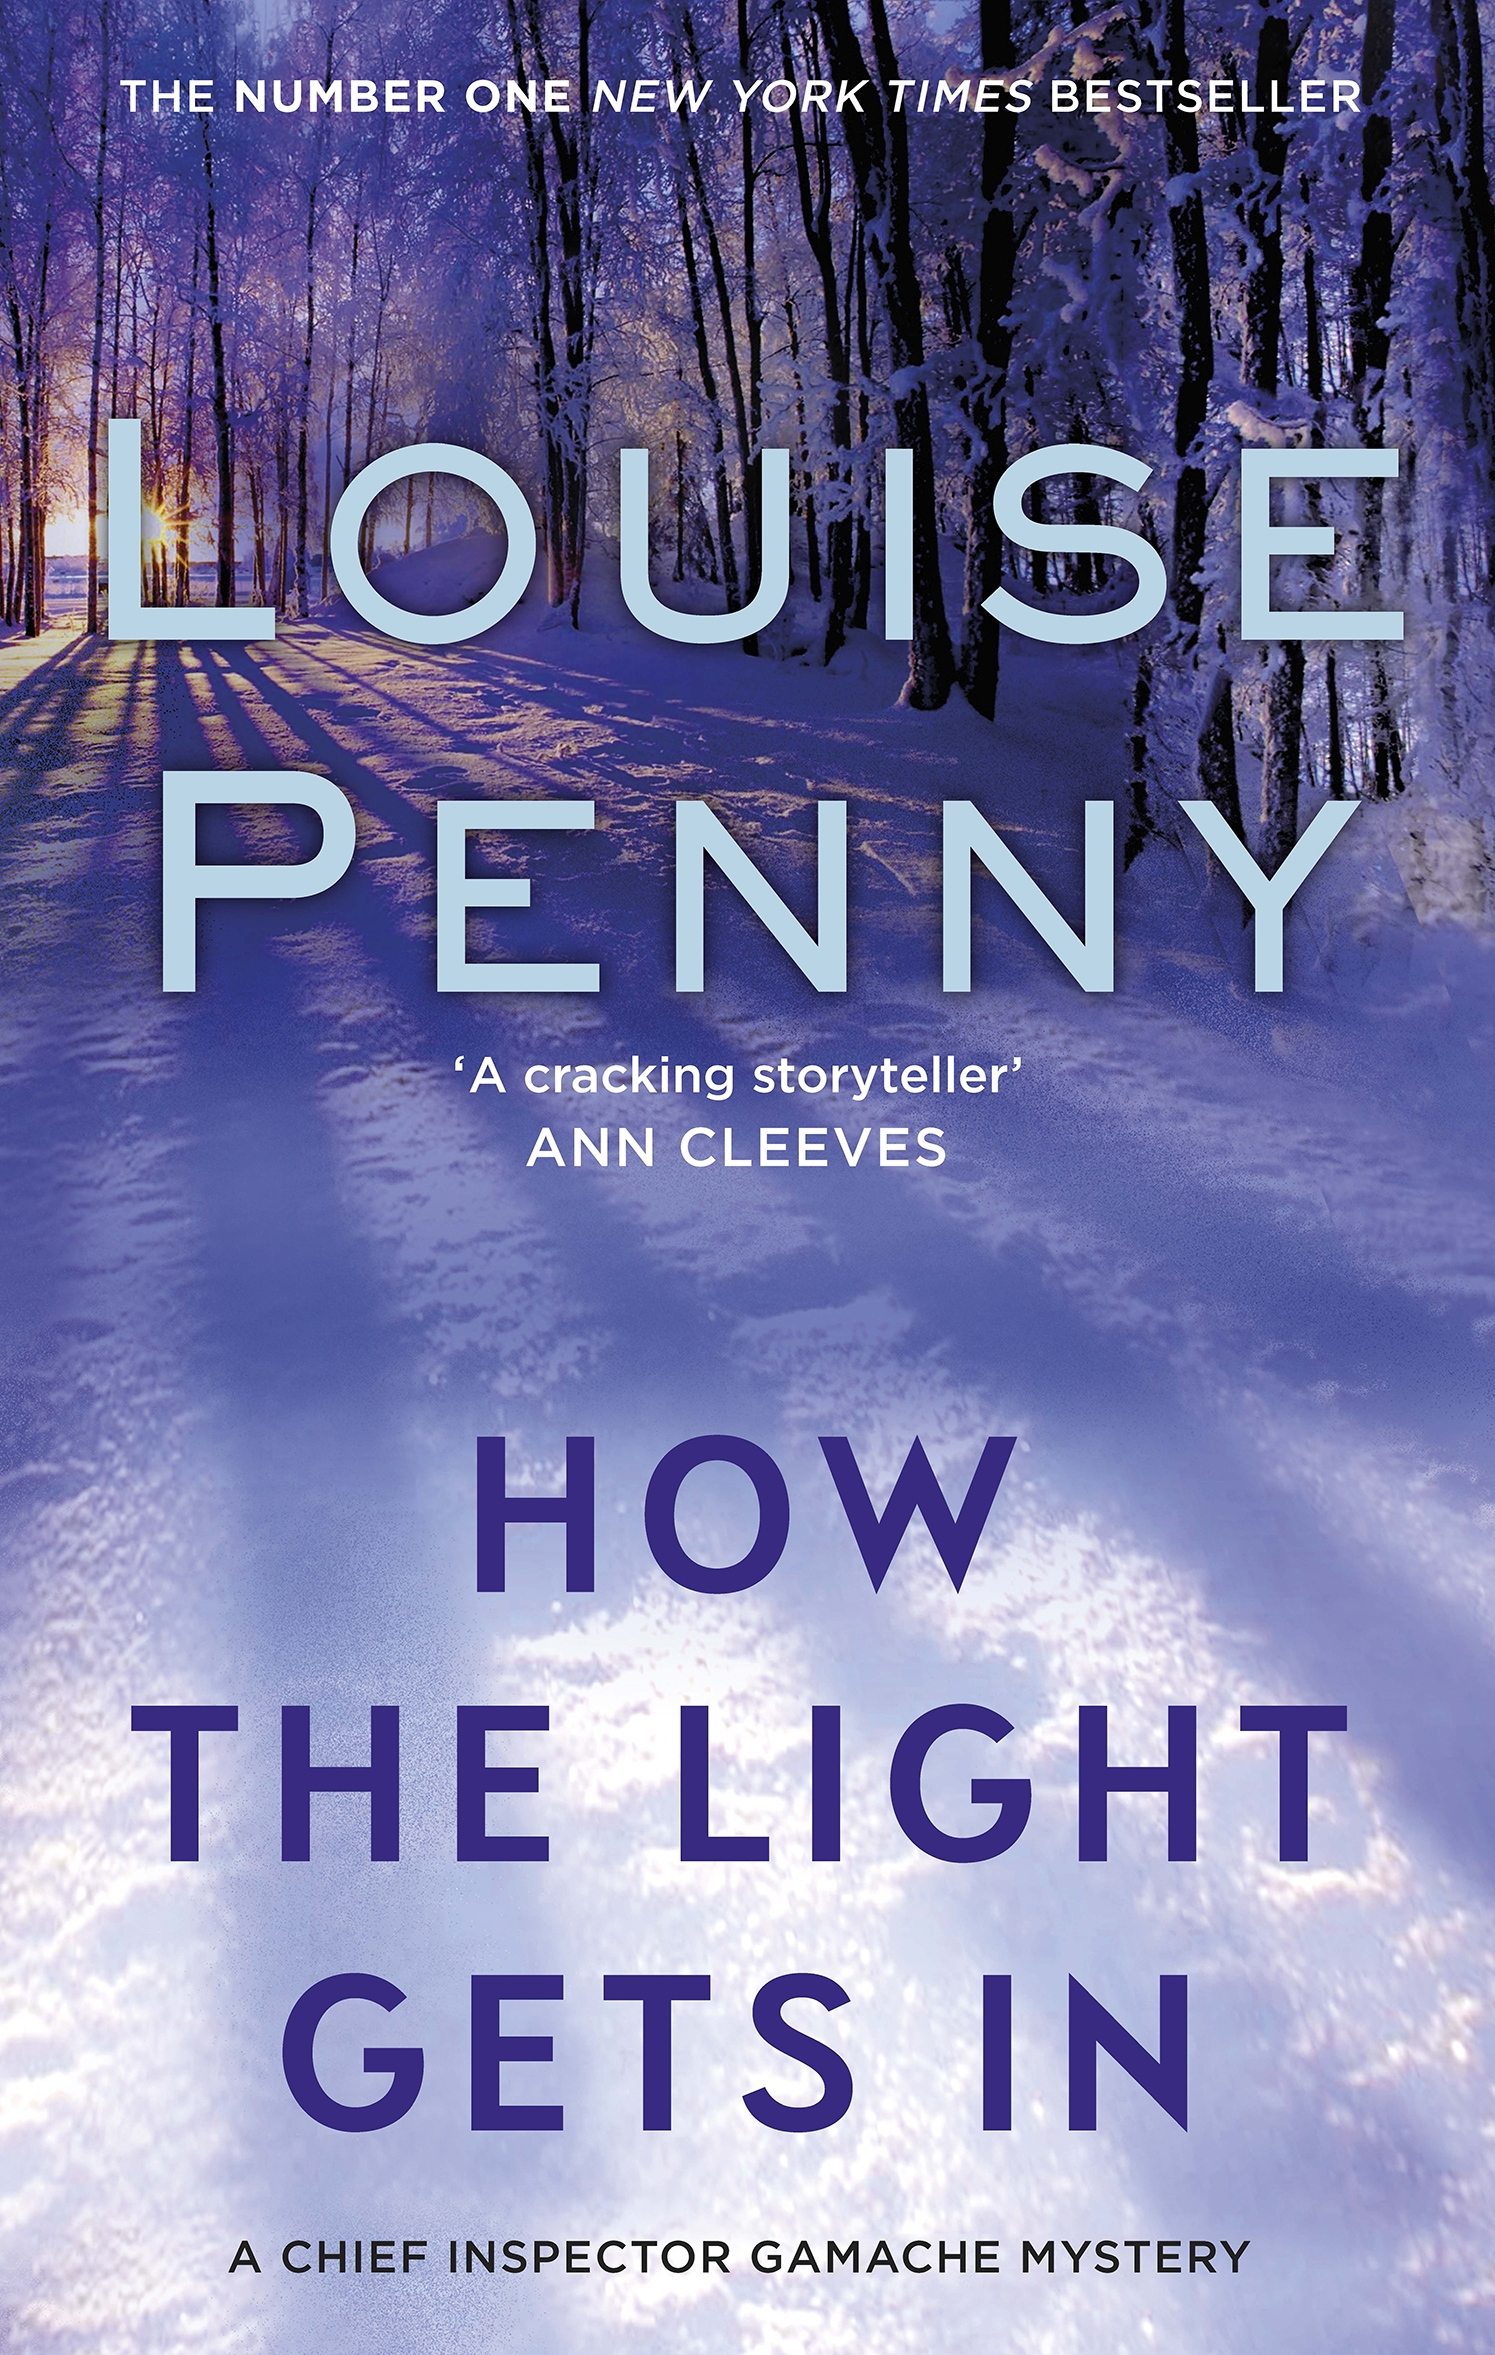 Review: Gamache finds darkness in City of Light in Louise Penny's new novel